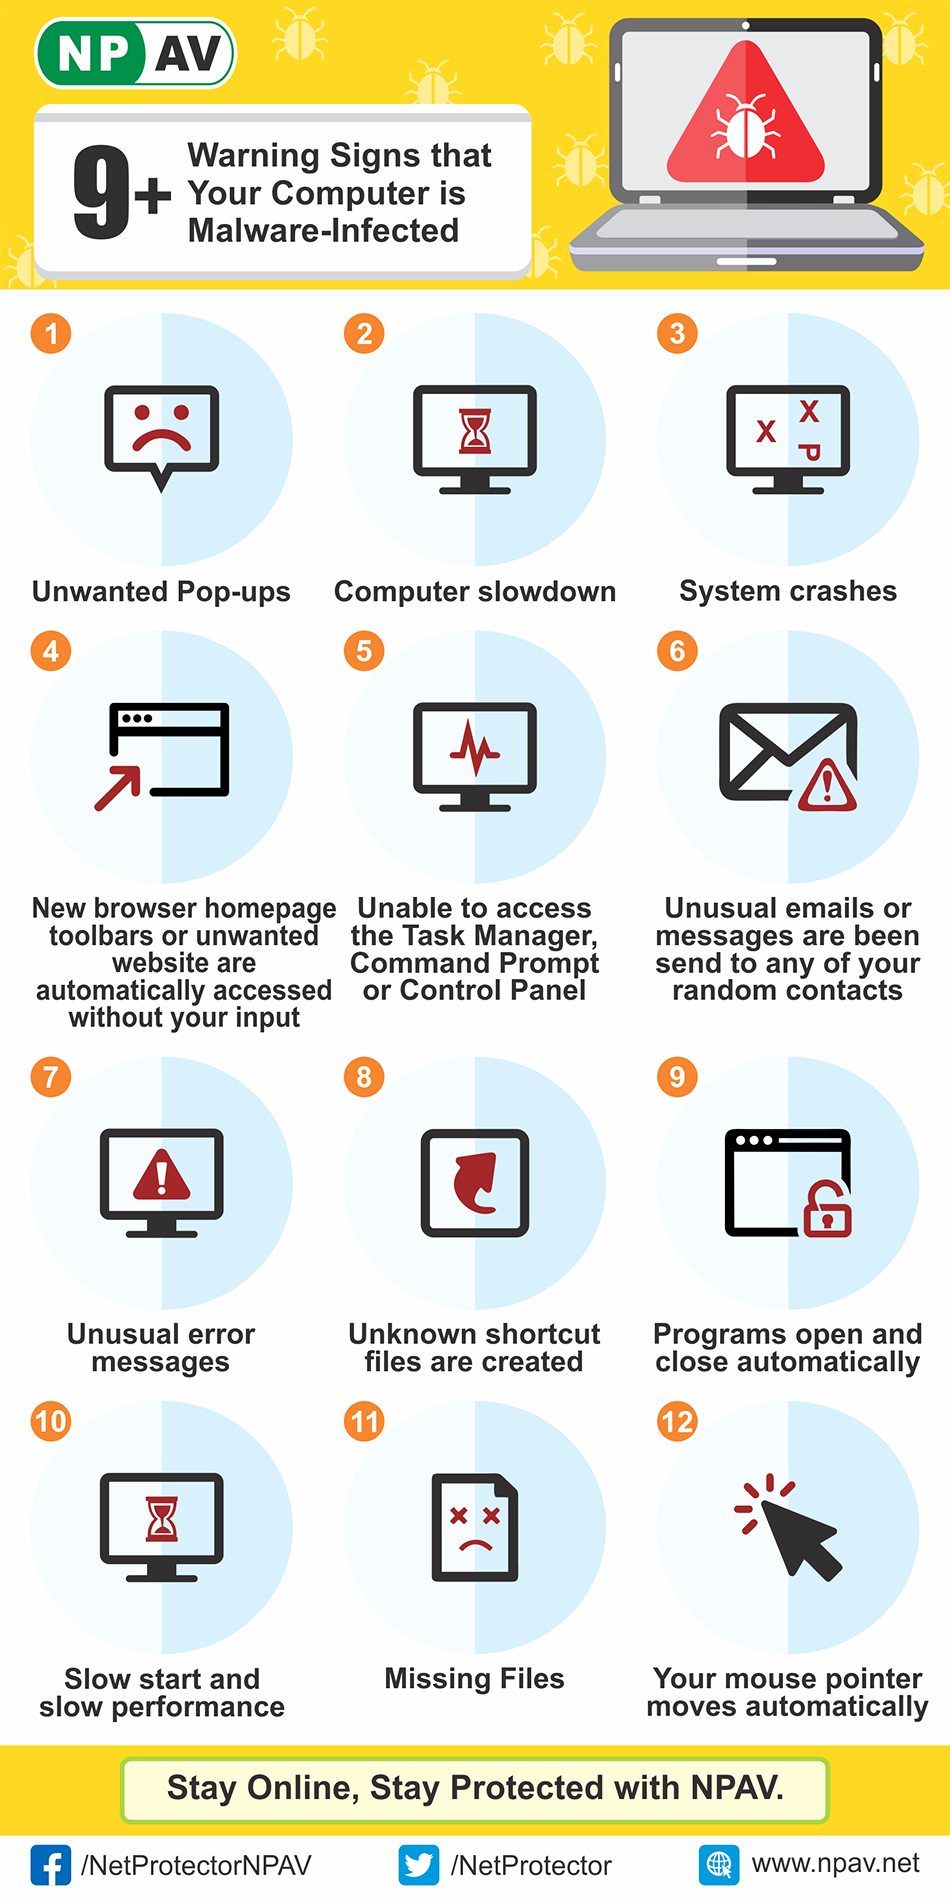 Warning signs that your computer is Malware Infected